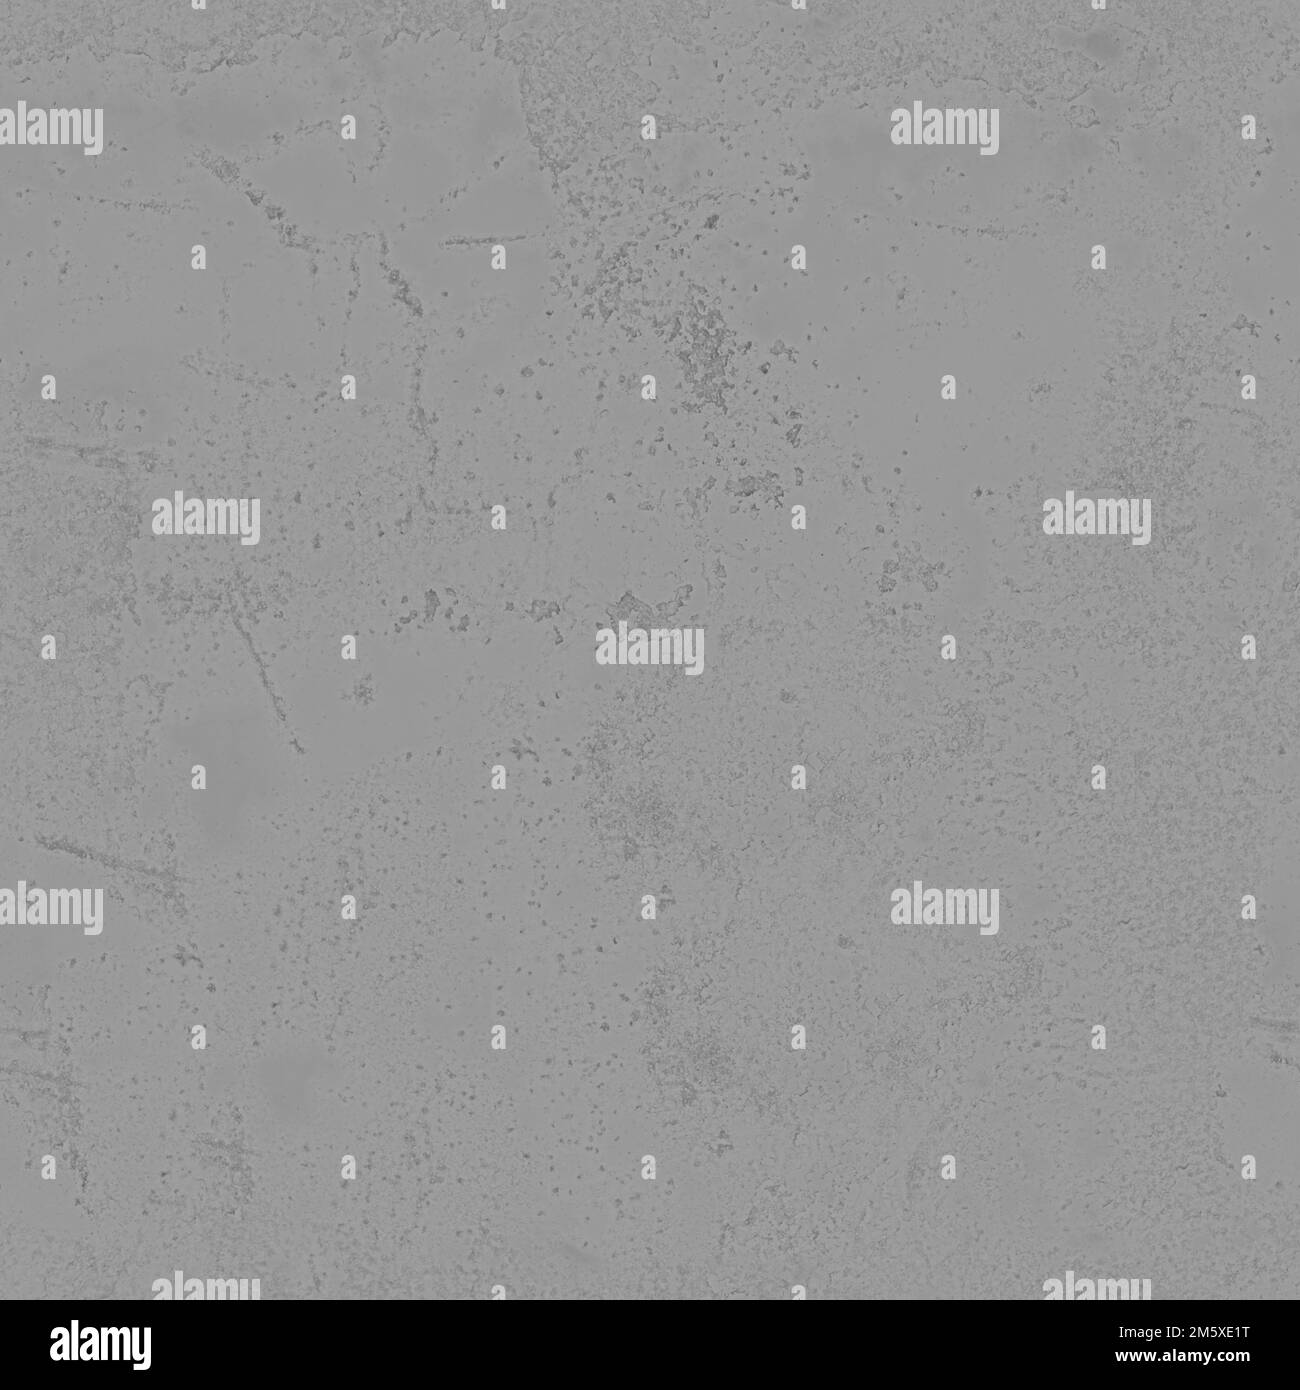 Glossiness map Texture metal, glossiness Texture mapping Stock Photo ...